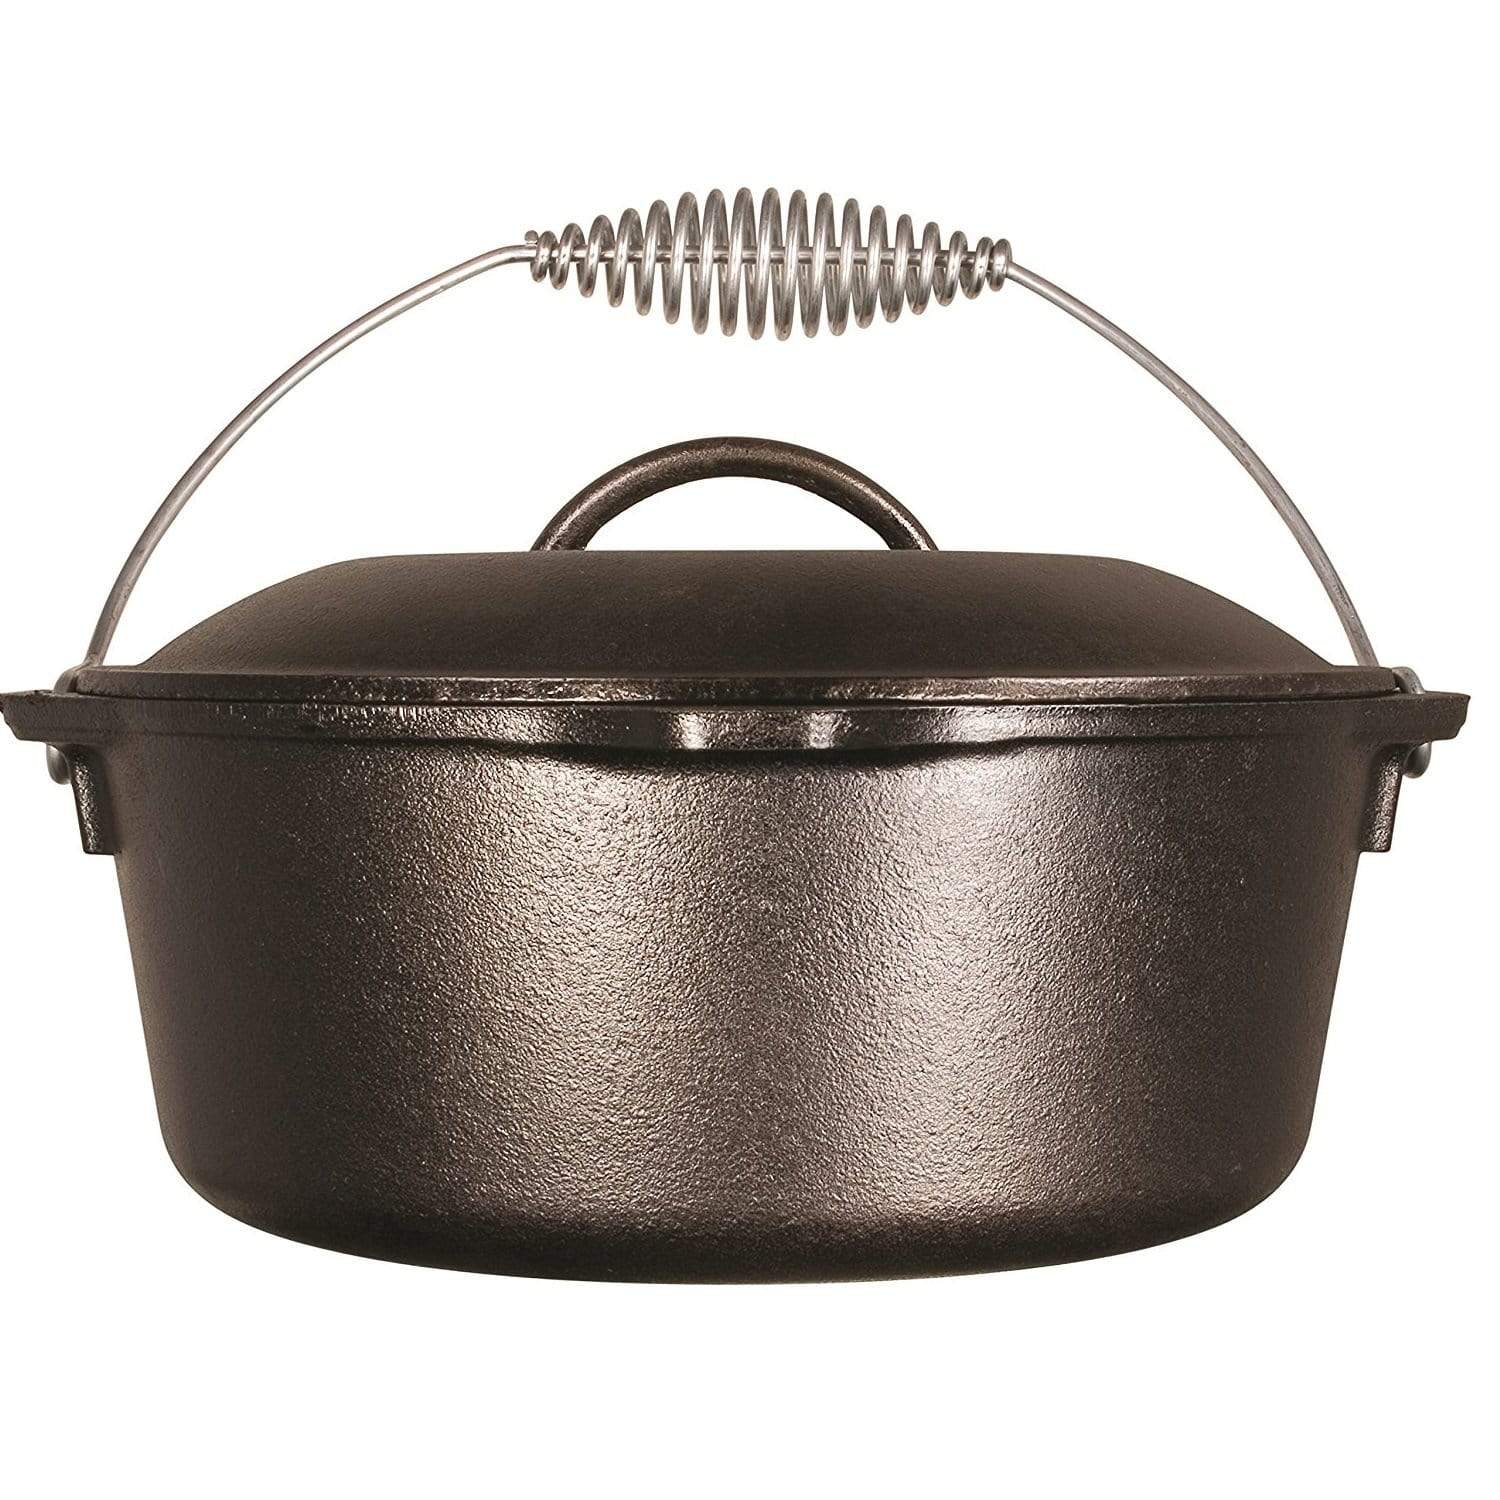 Lodge Cast Iron Camping & Outdoor : Cooking Lodge 10in Cast Iron Dutch Oven Pre-Seasoned 5-Quart